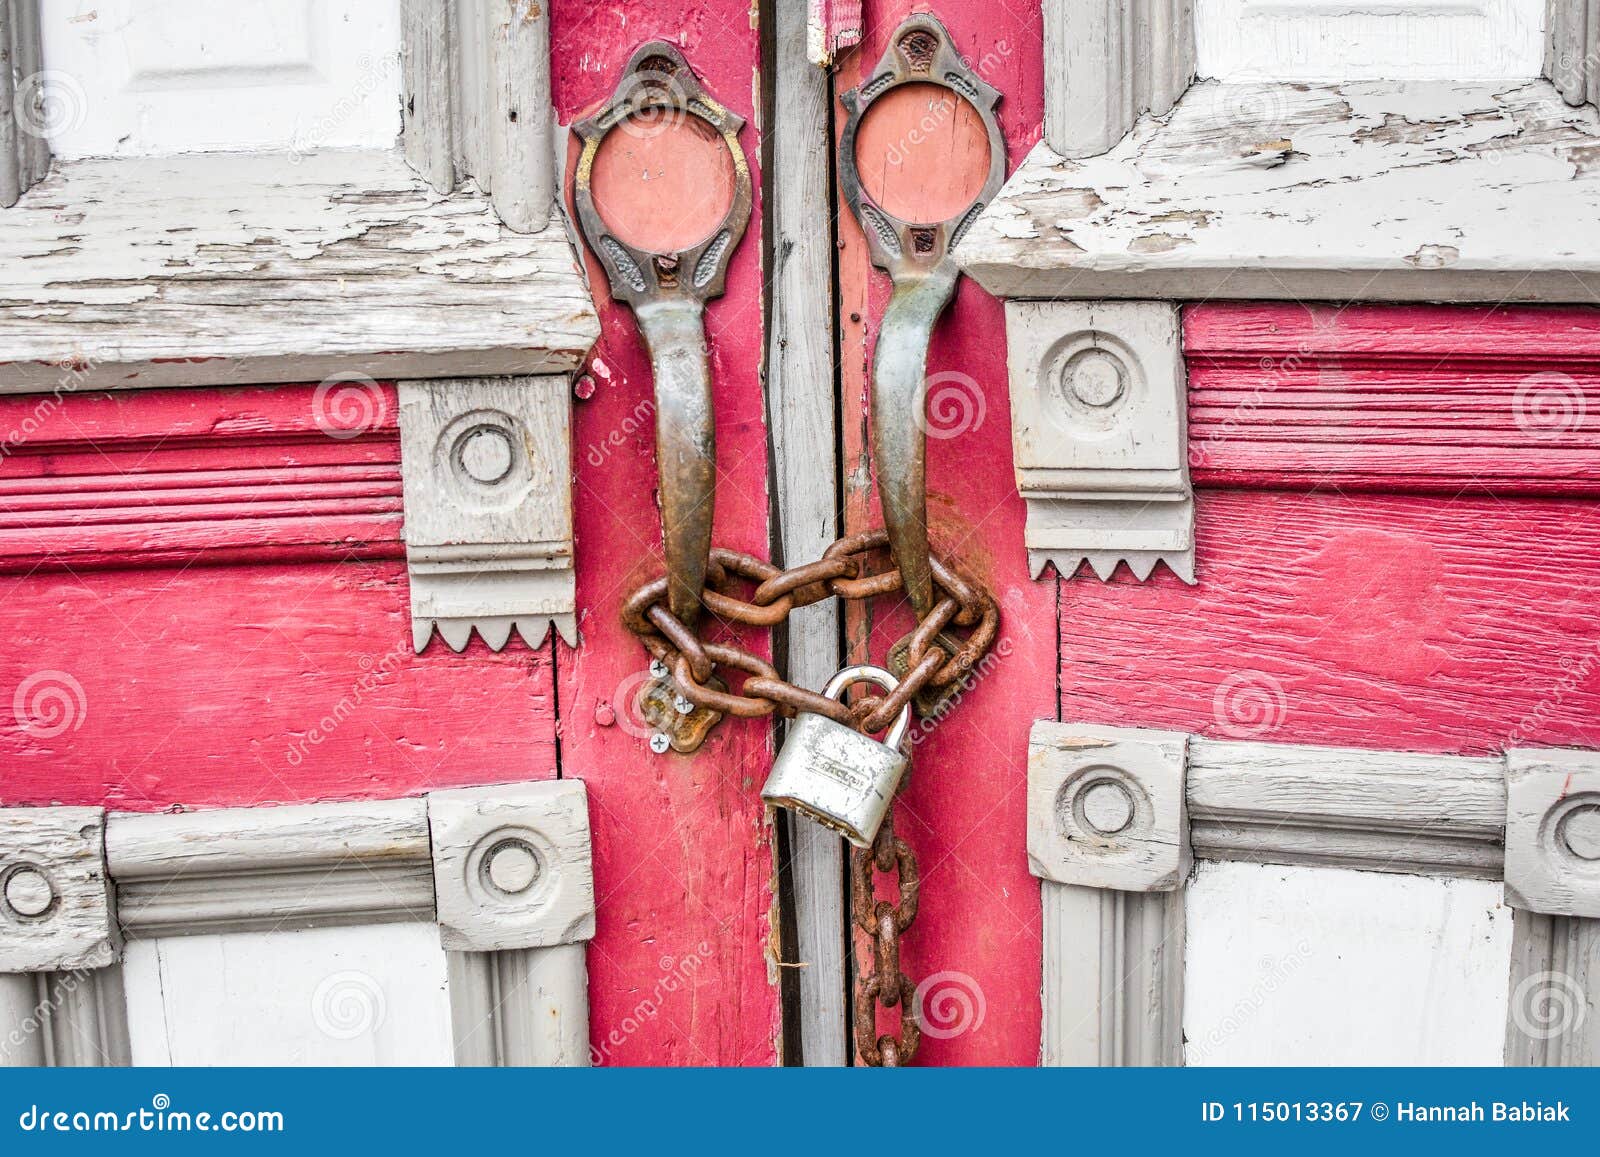 abandoned red church doors with chain and lock